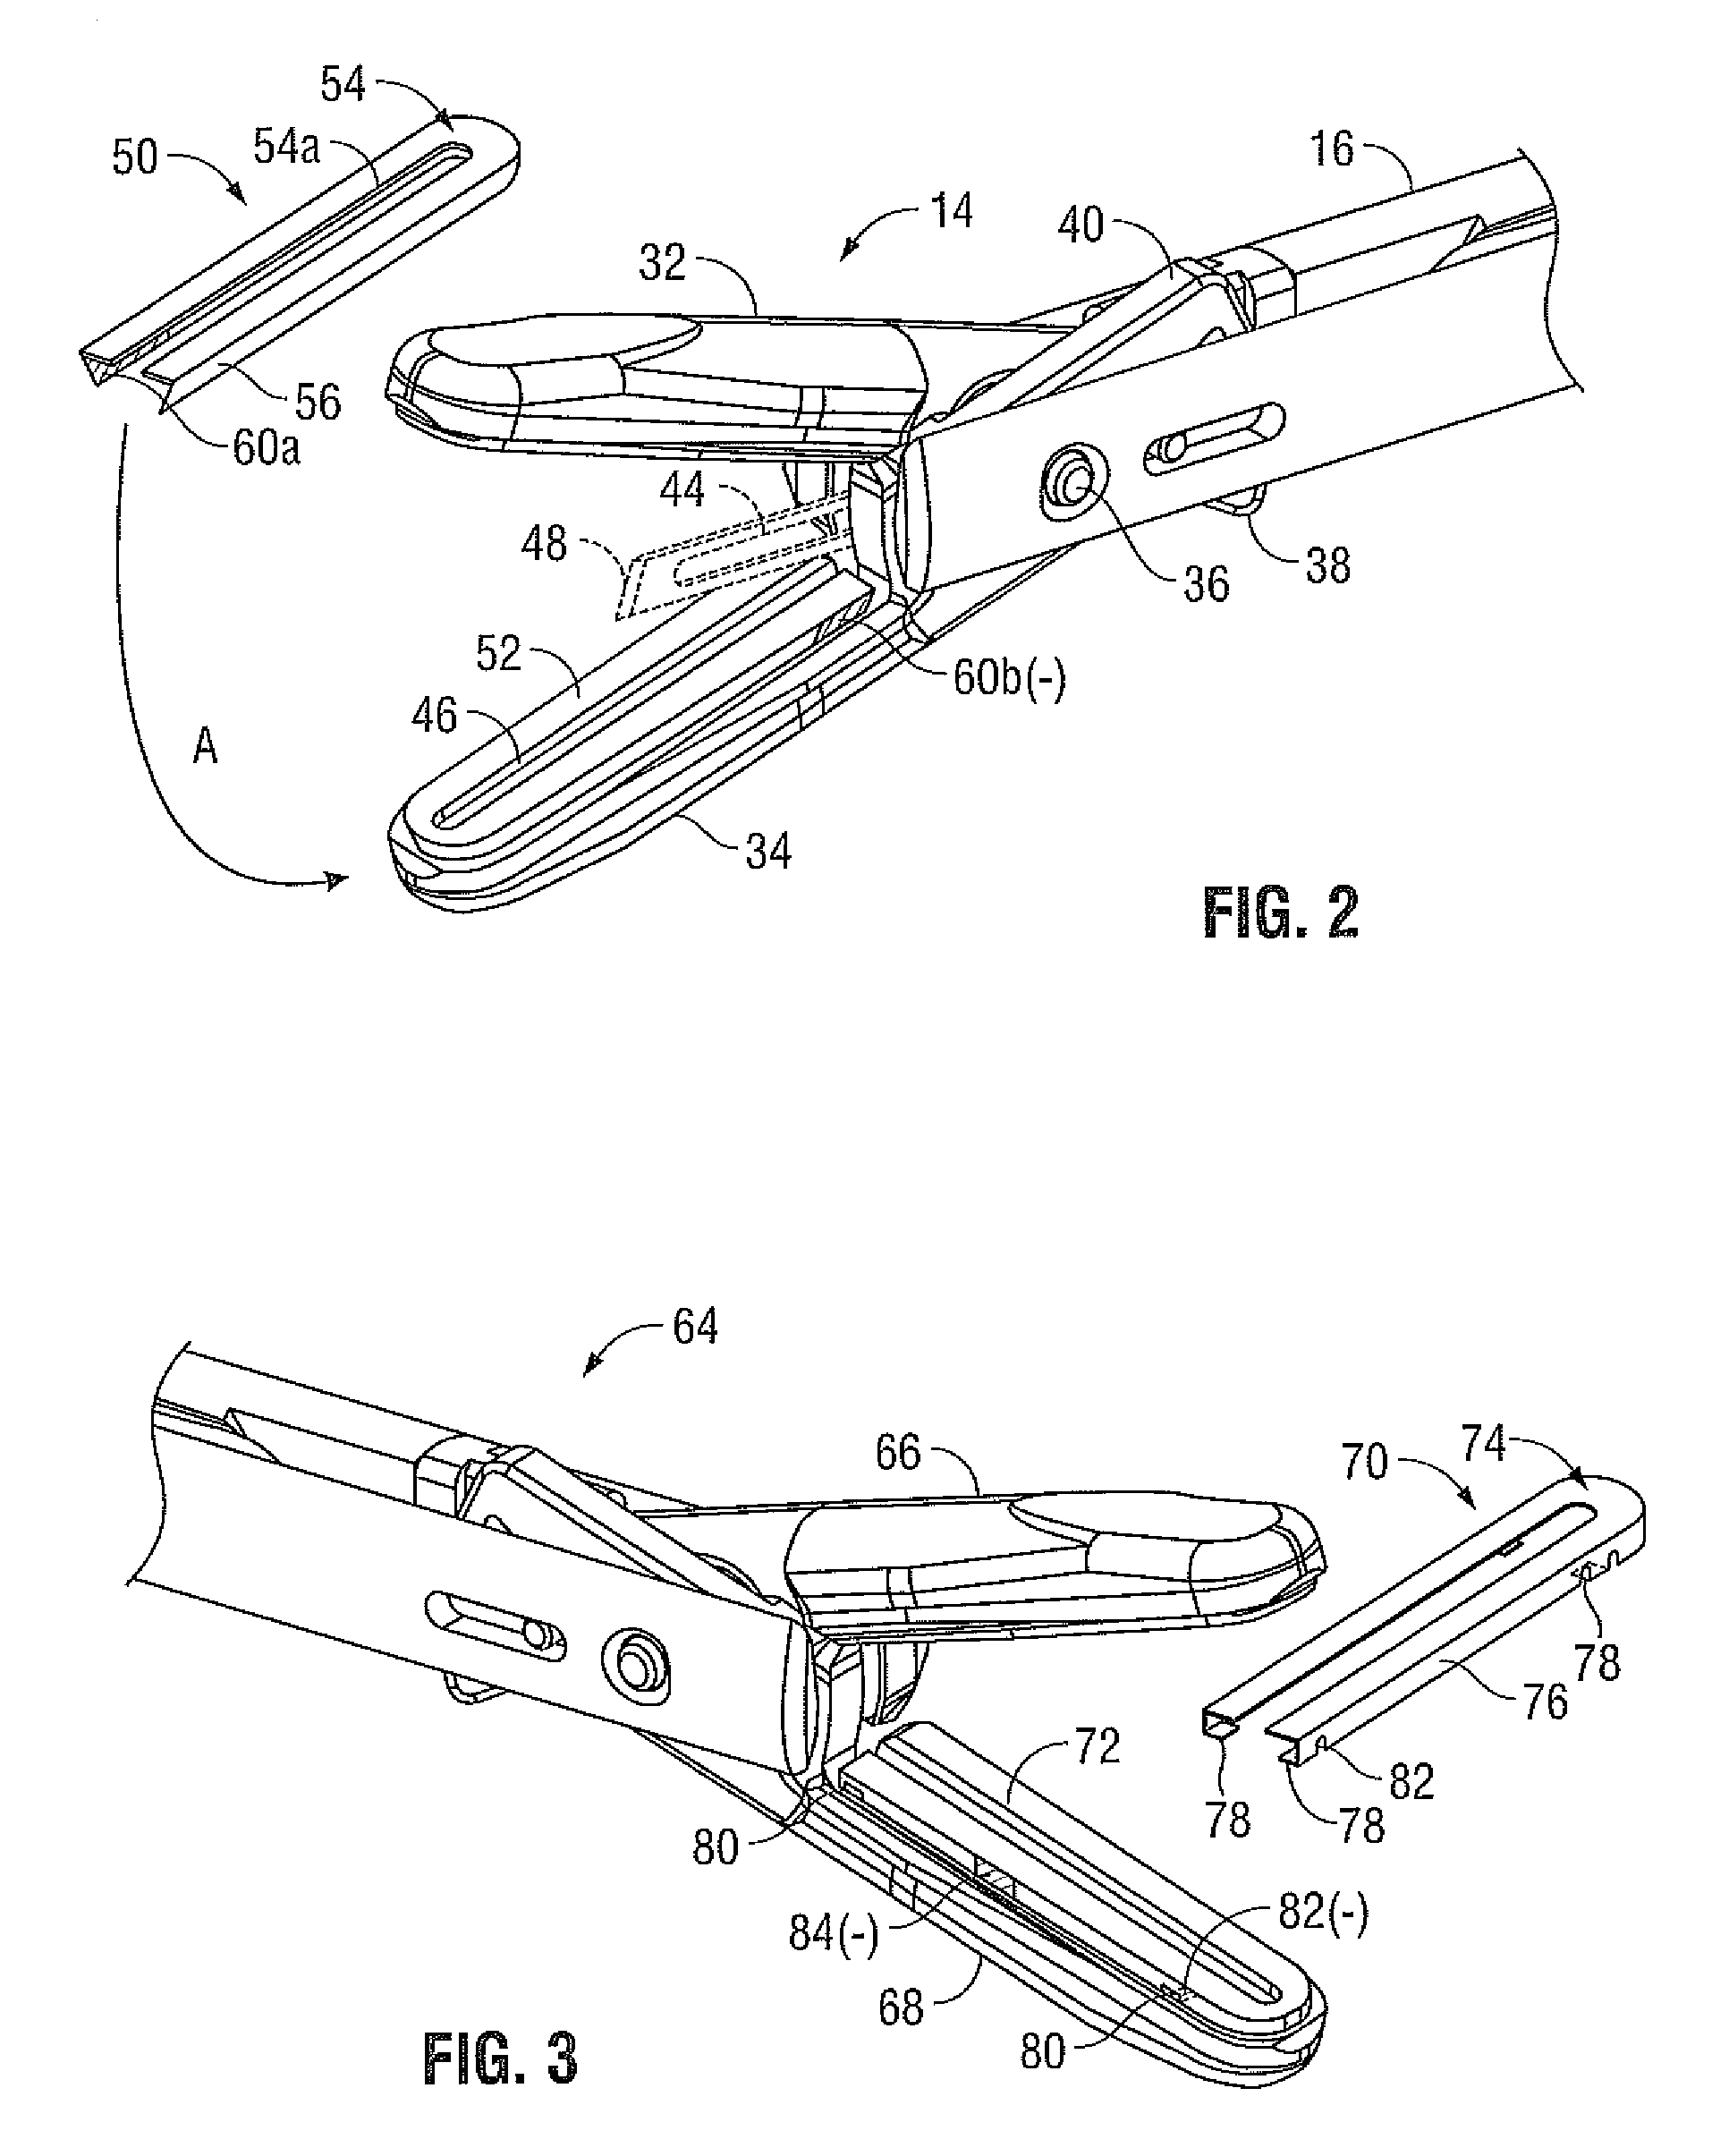 Surgical instruments with removable components